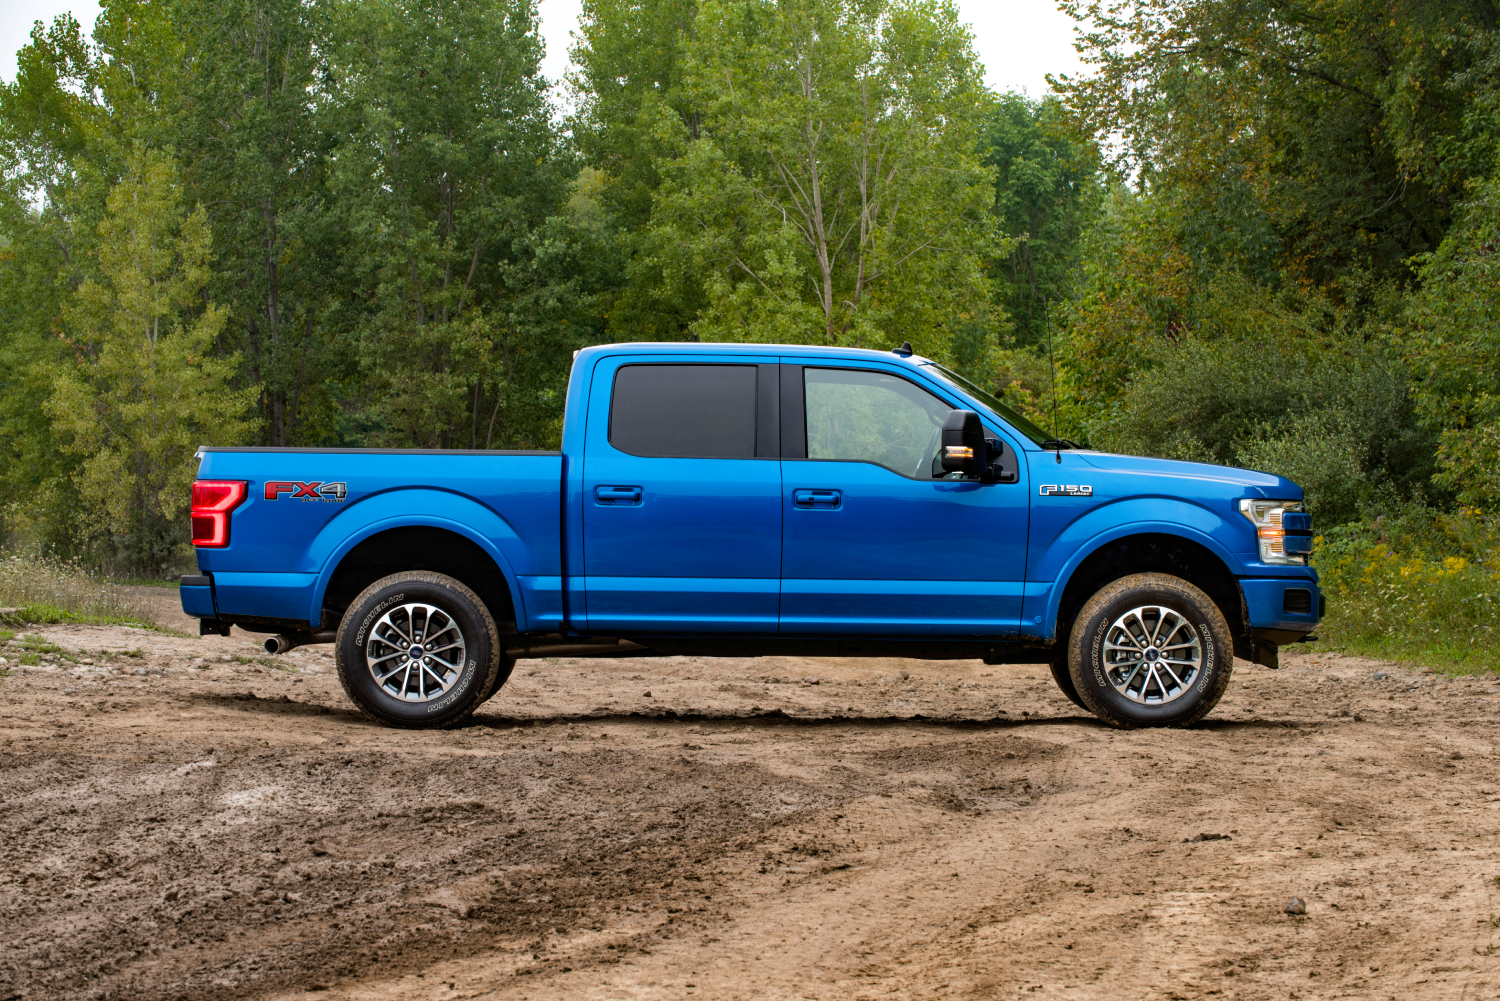 The most popular trucks from four years ago according to J.D. Power